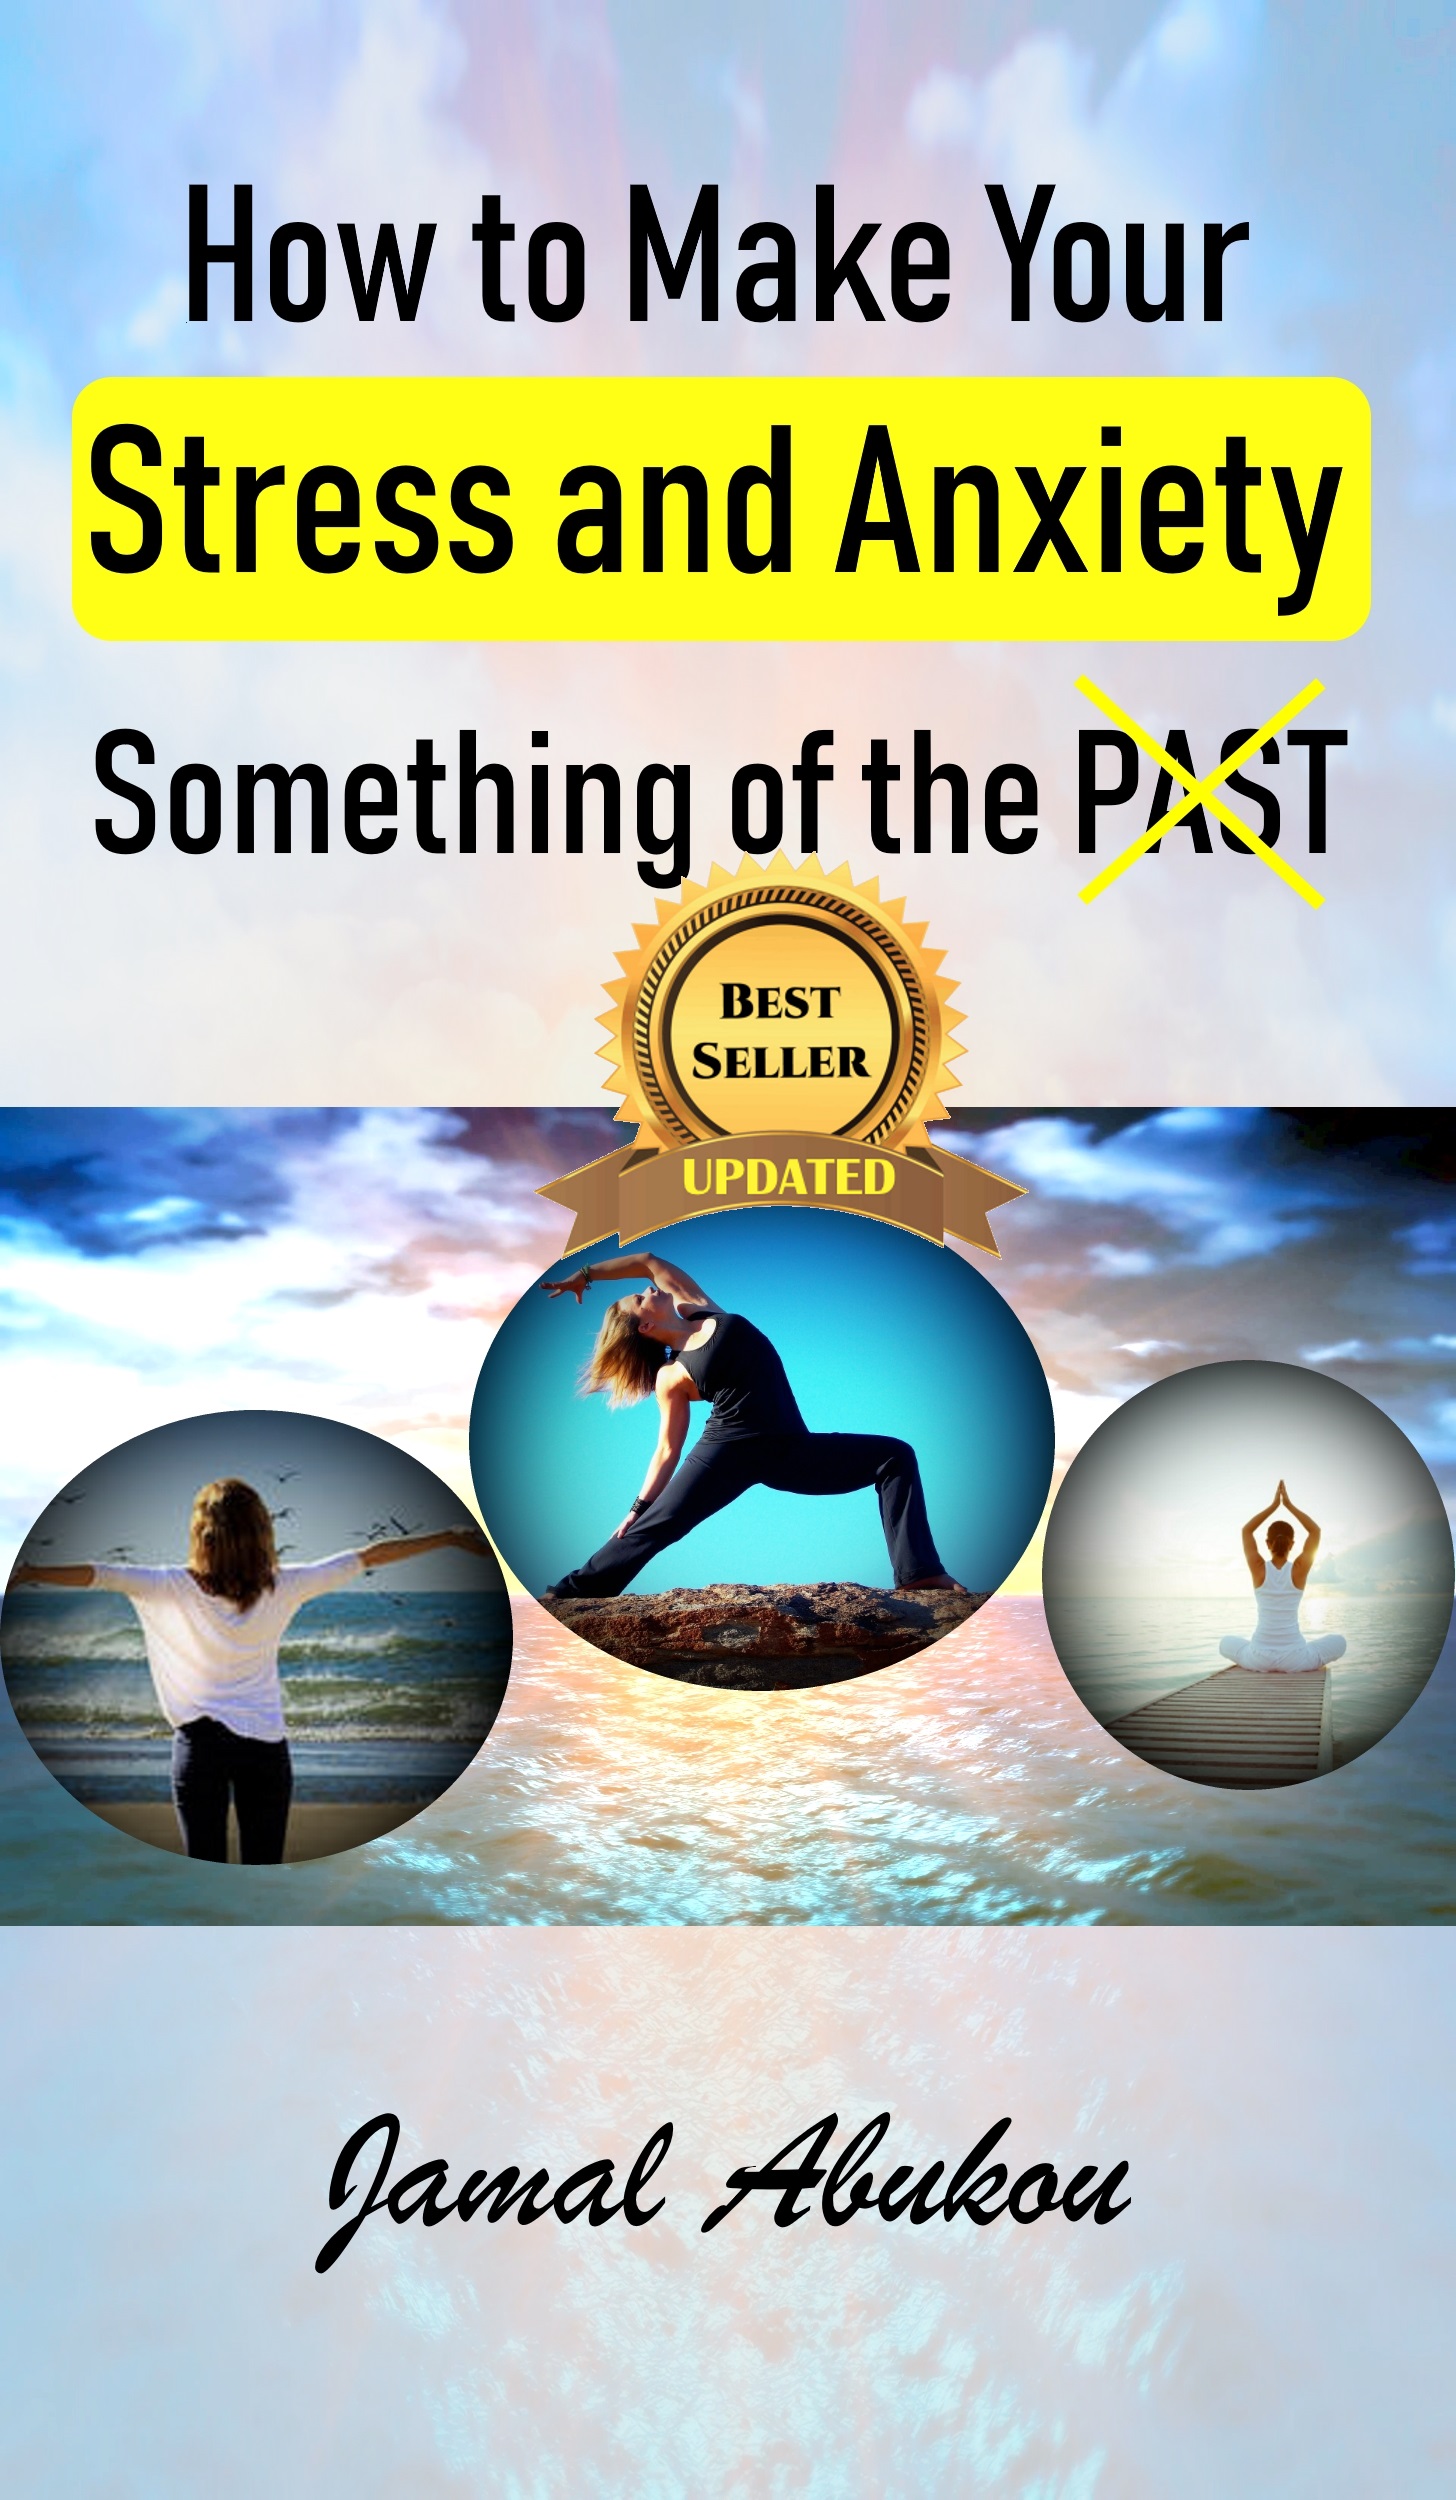 FREE: How to Make Your Stress and Anxiety Something of the PAST by Jamal Abukou